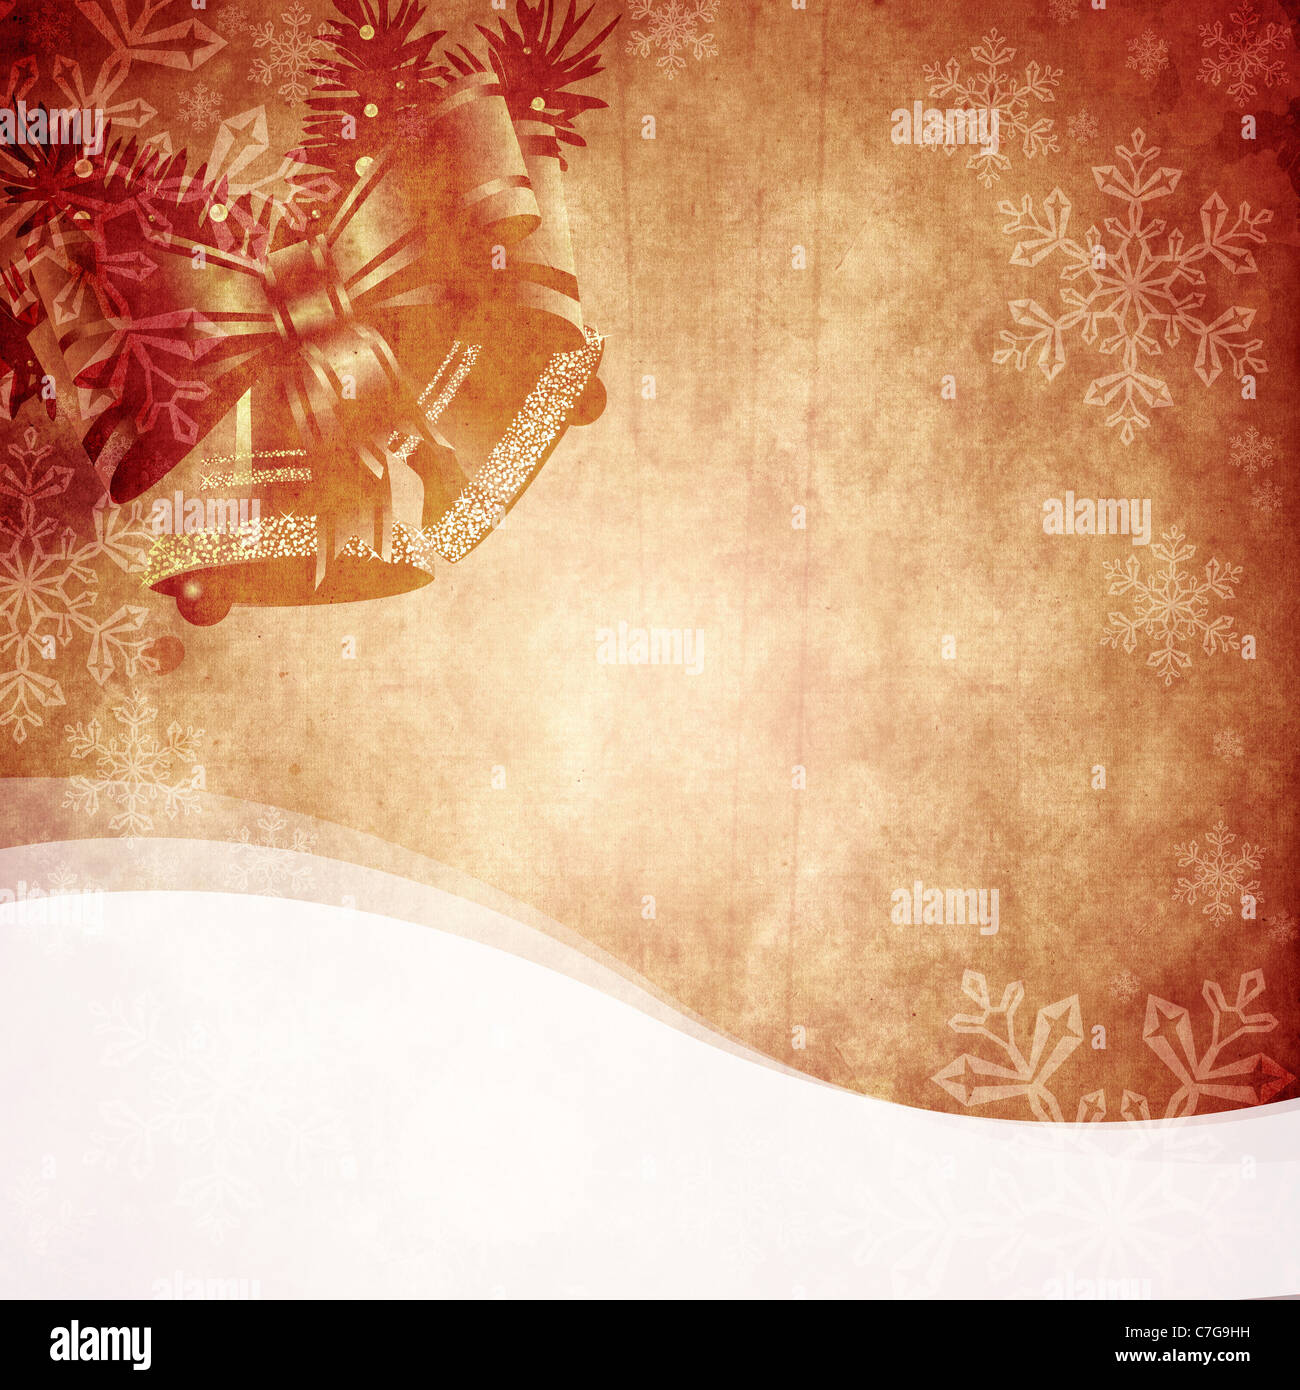 Vintage Christmas background design with copy space for your text and images, very high resolution available. Stock Photo